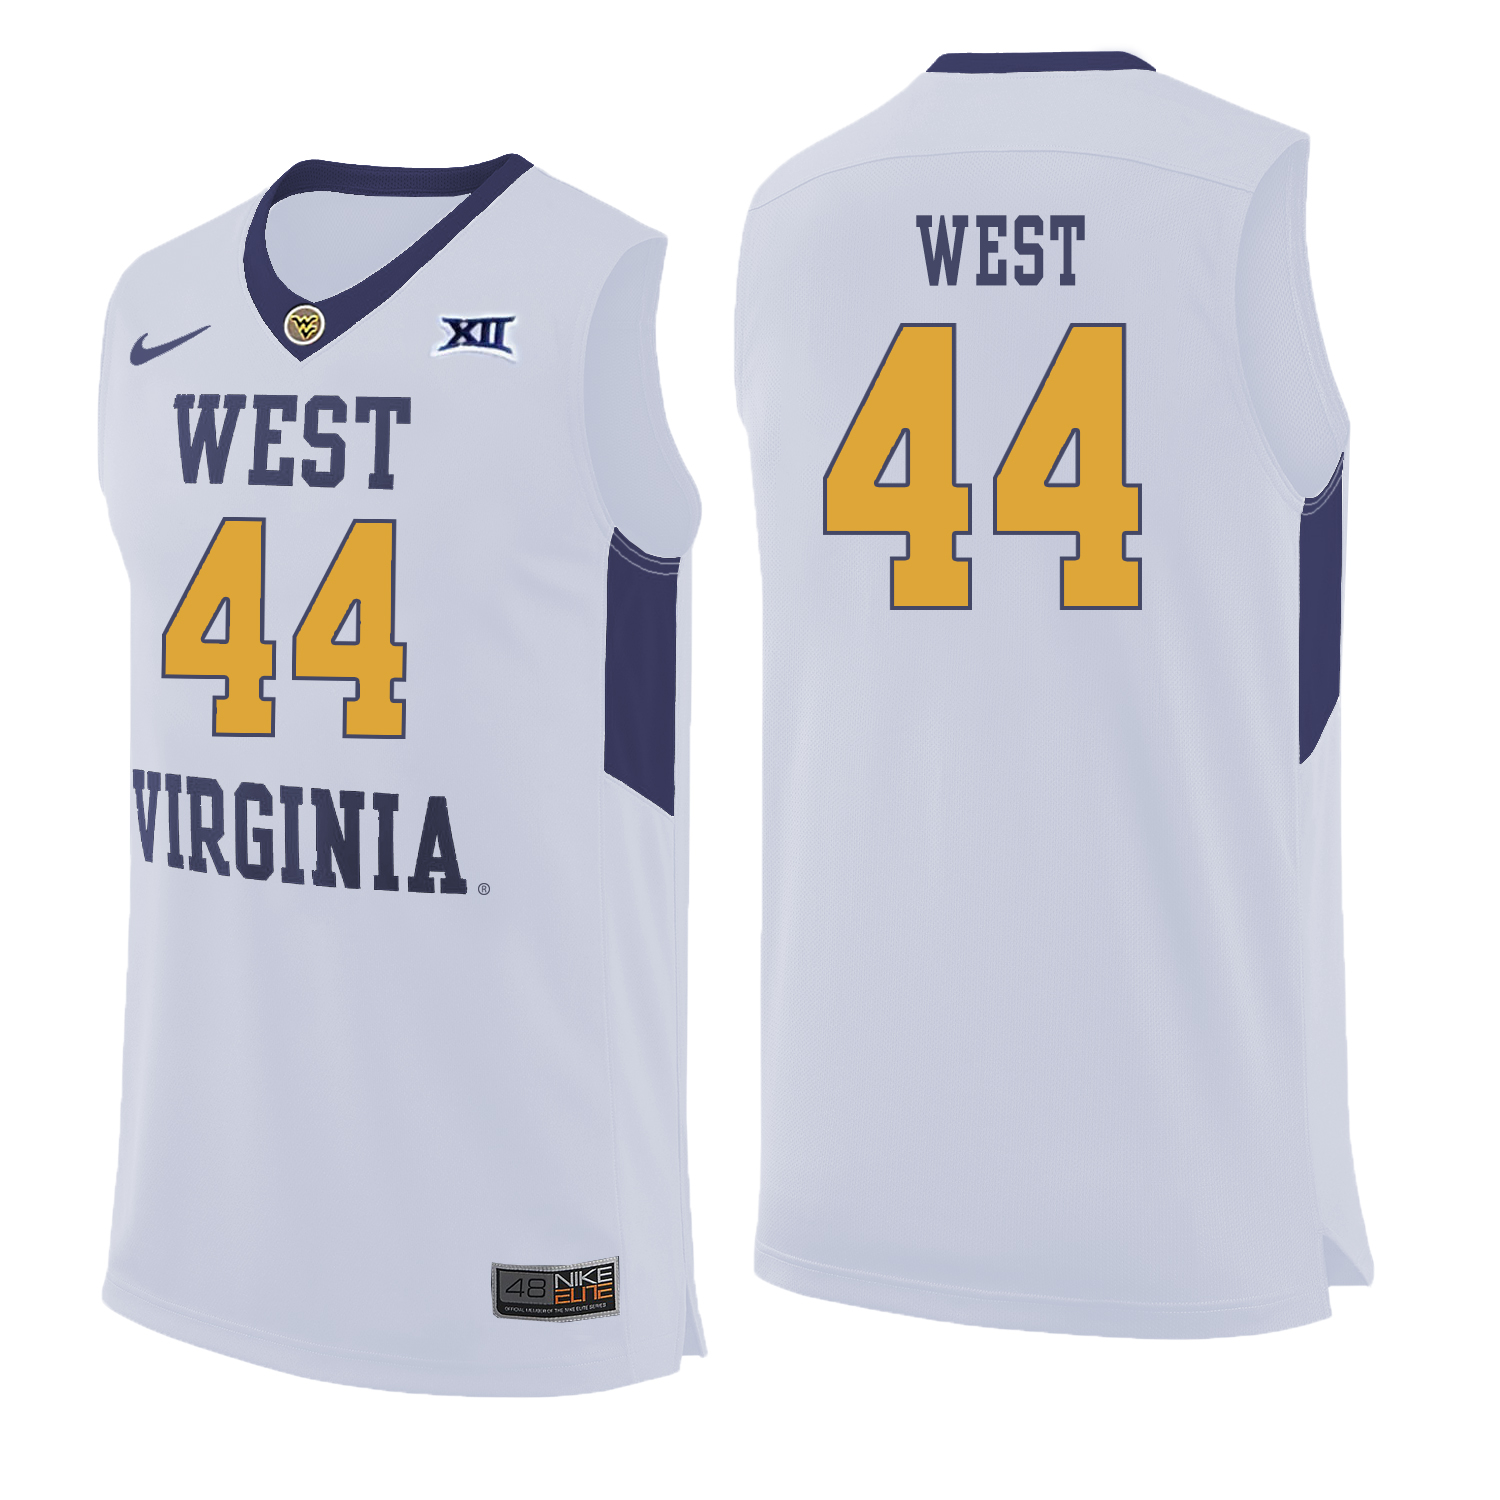 West Virginia Mountaineers 44 Jerry West White College Basketball Jersey